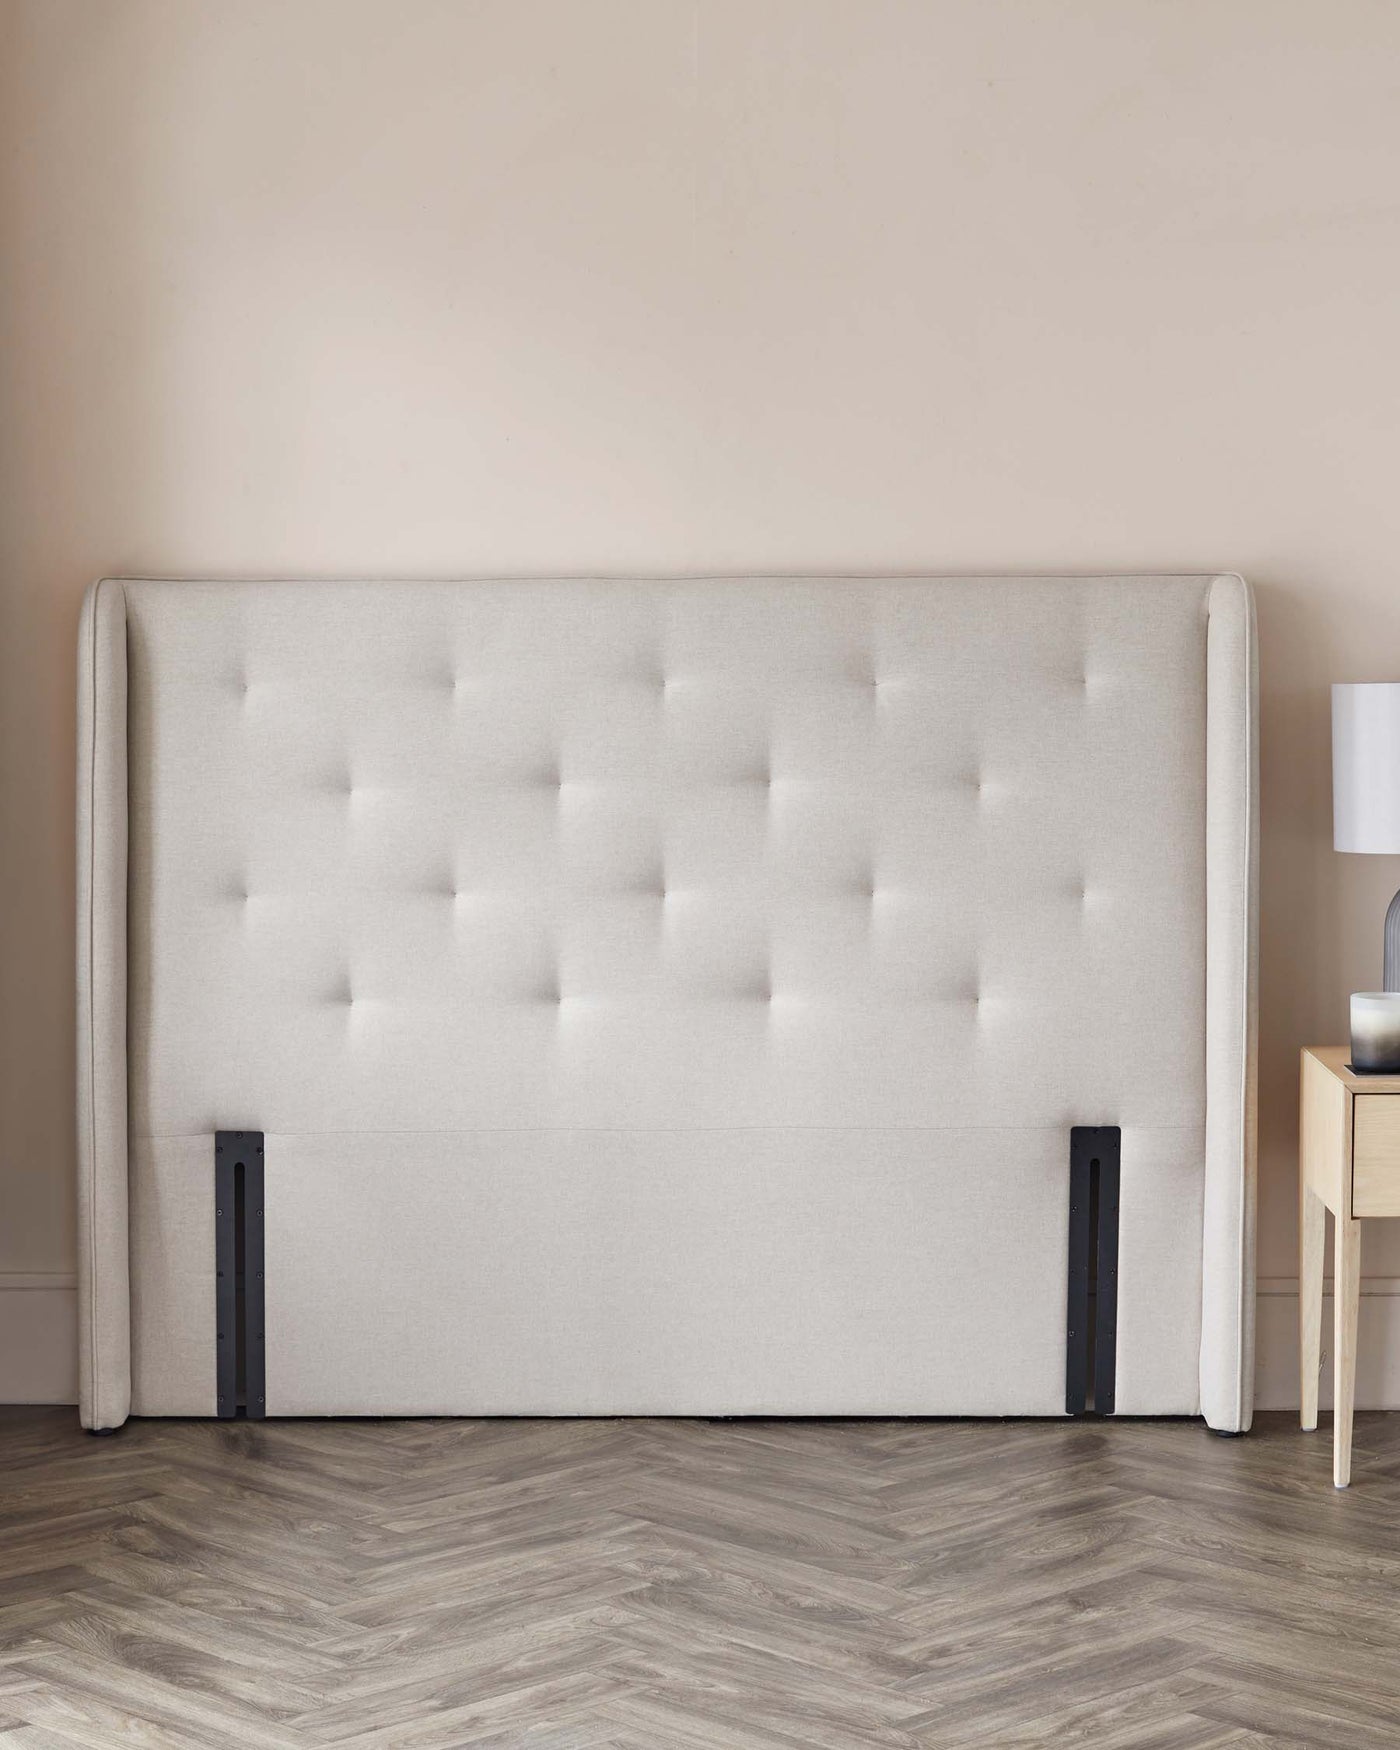 A large, upright, contemporary-style upholstered headboard featuring tufted buttons and a neutral fabric, flanked by black metal legs. To the right, a small wooden bedside table with a single drawer, supporting a minimalist table lamp with a cylindrical shade.